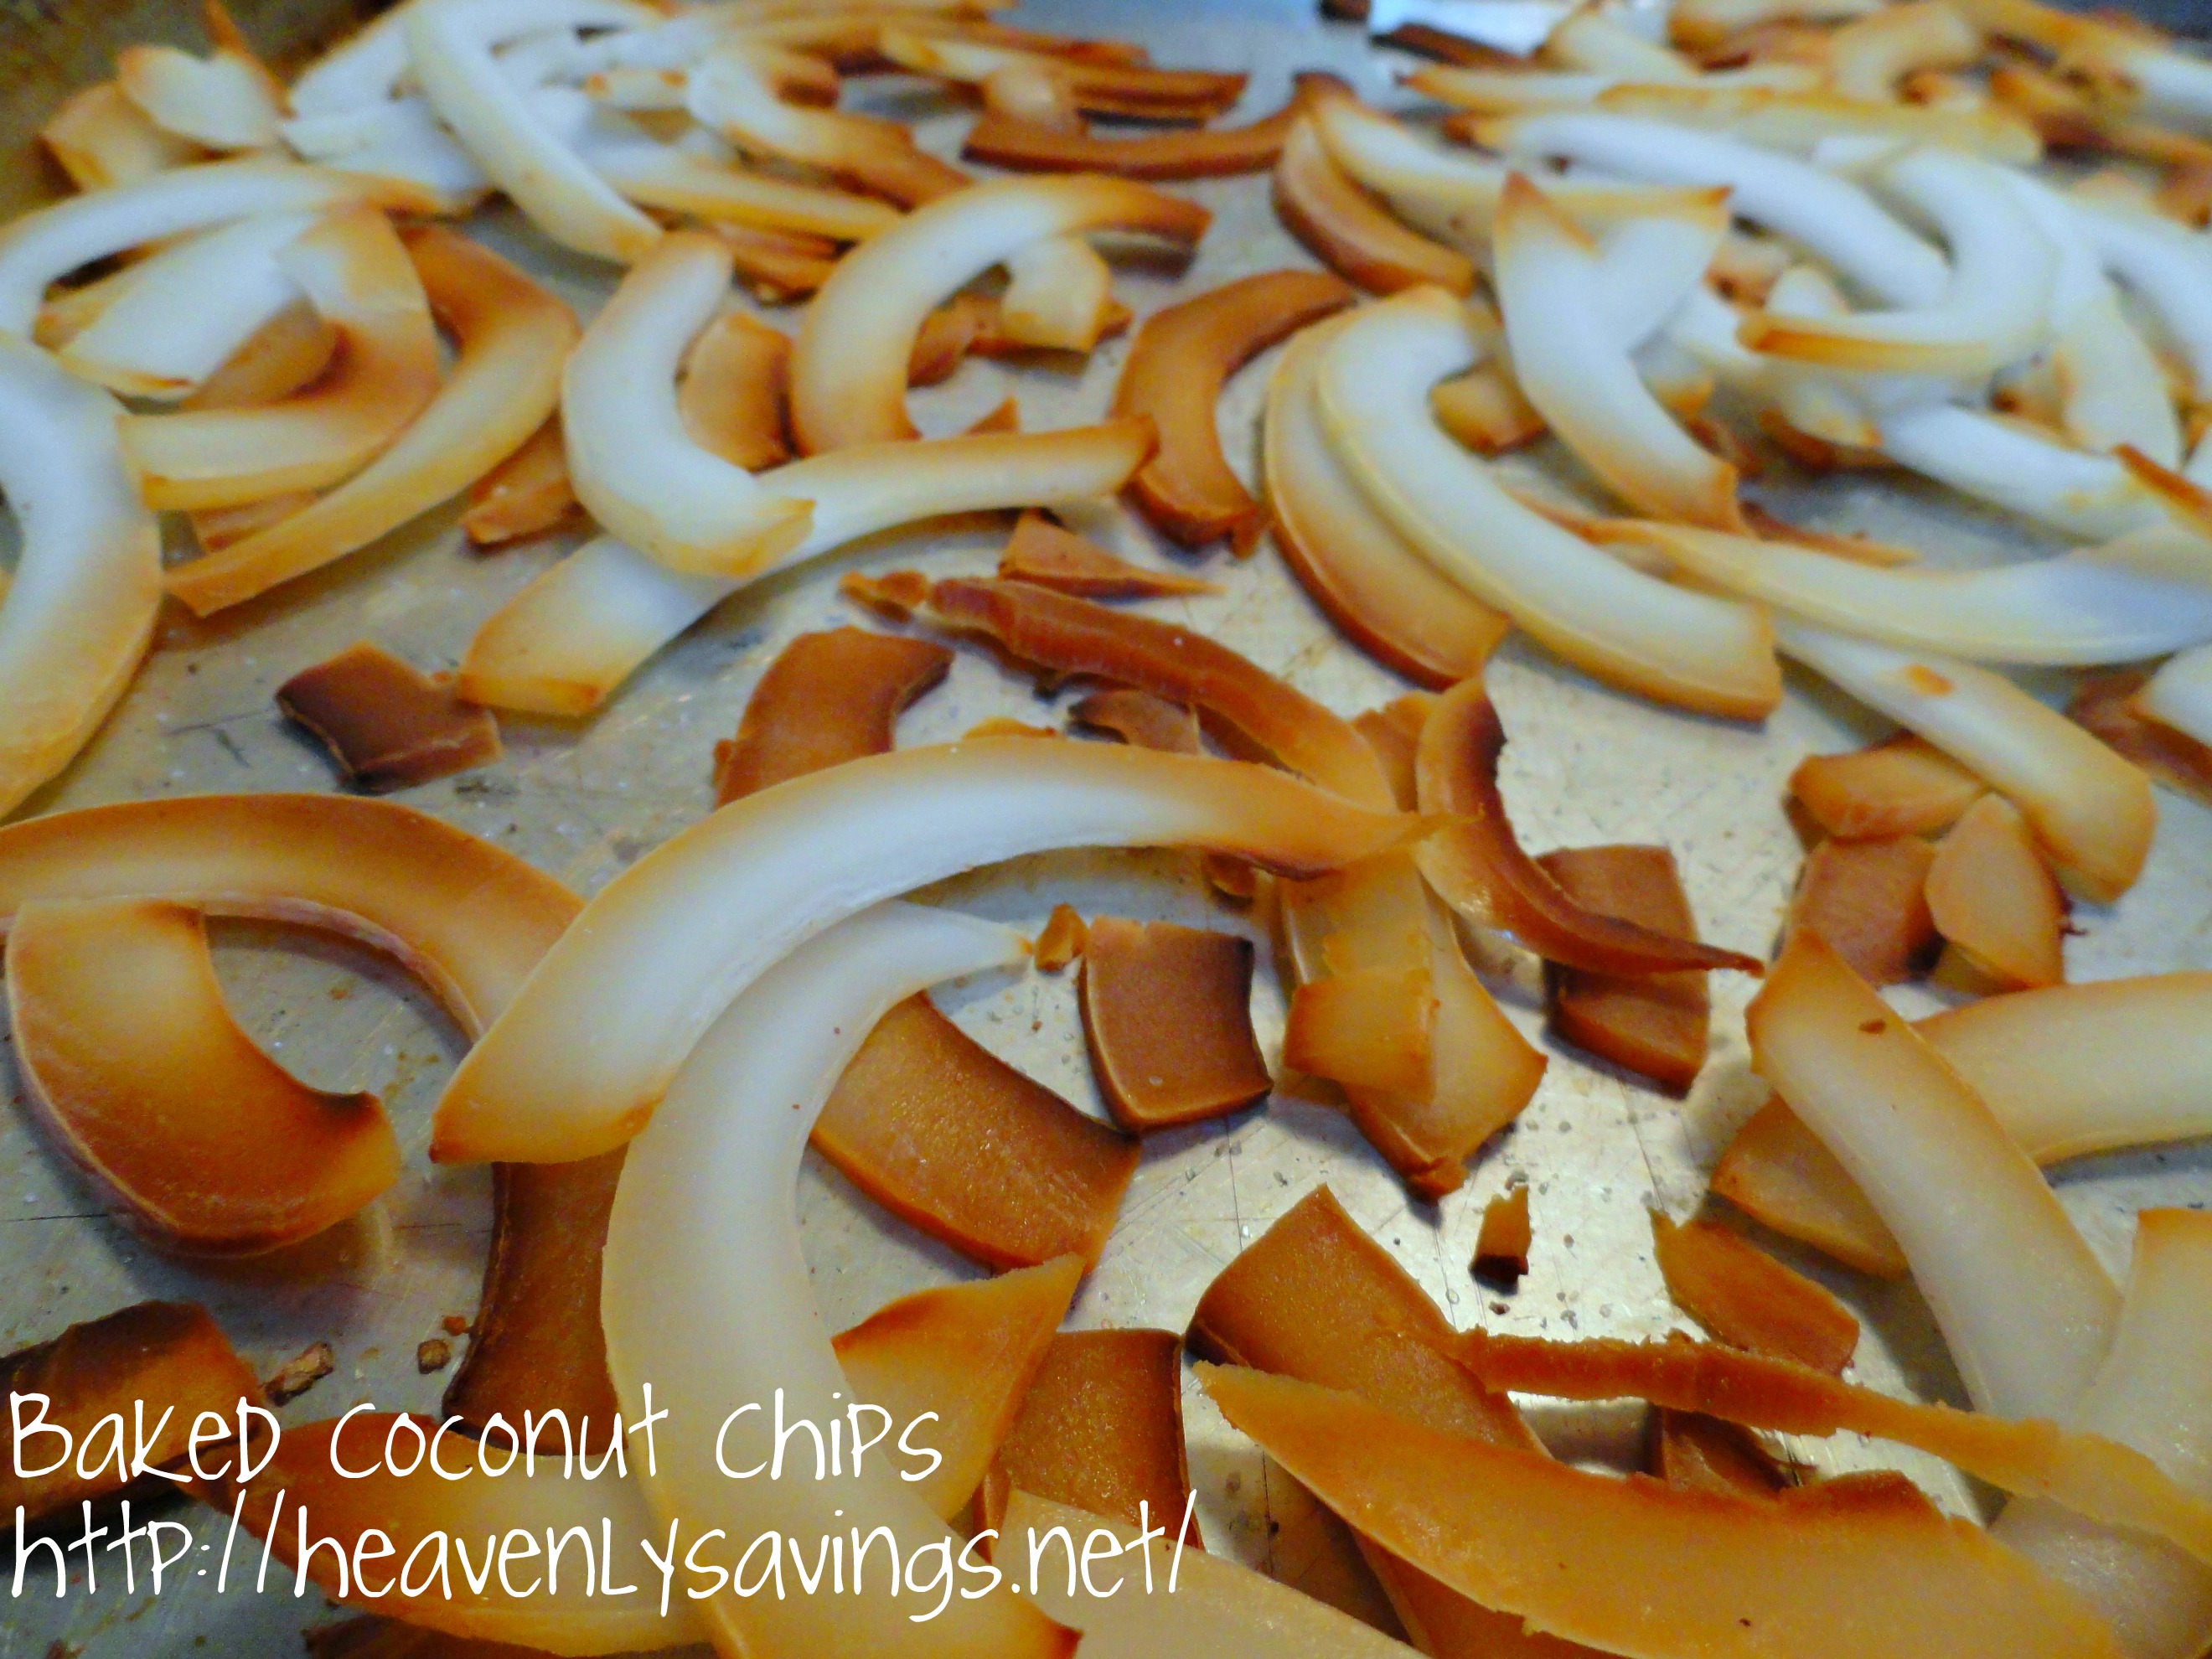 Easy to Make Homemade Coconut Chips!